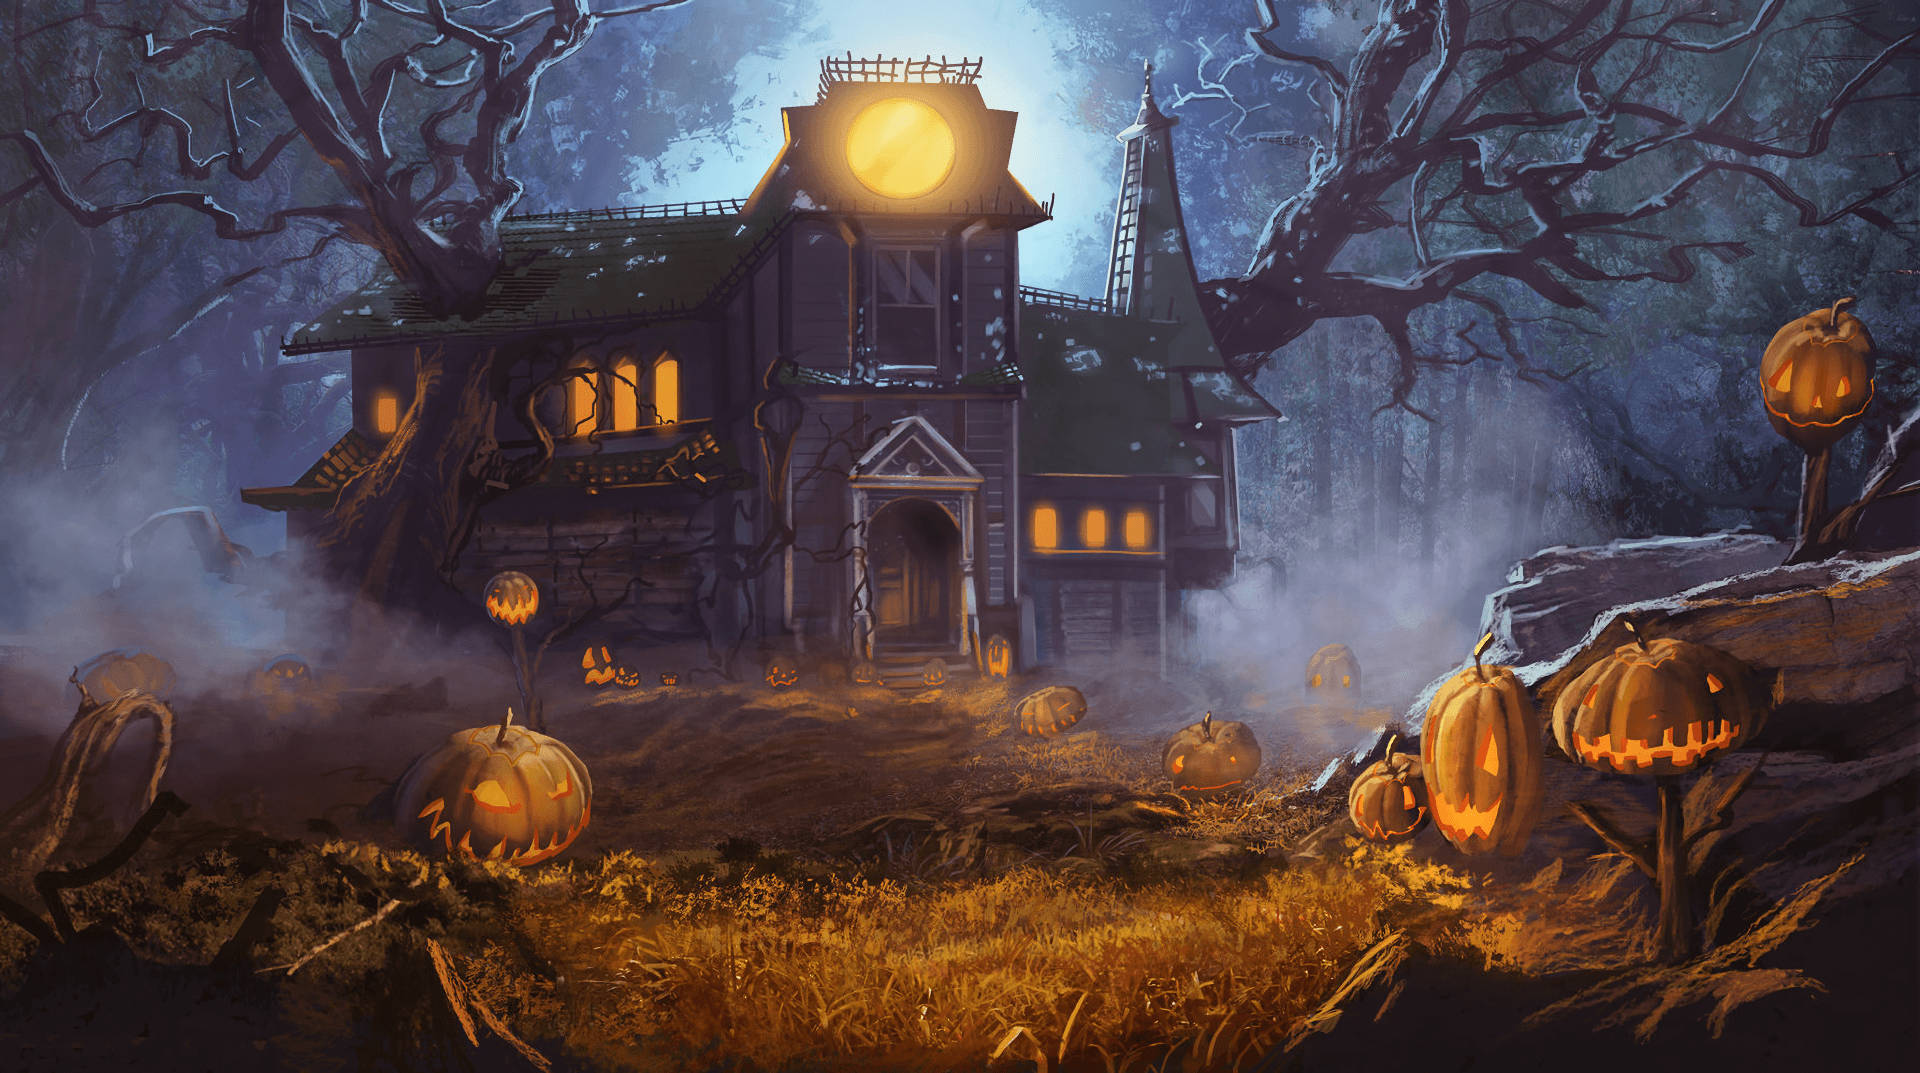 Welcome to the dark and spooky haunted house on Halloween night! Wallpaper